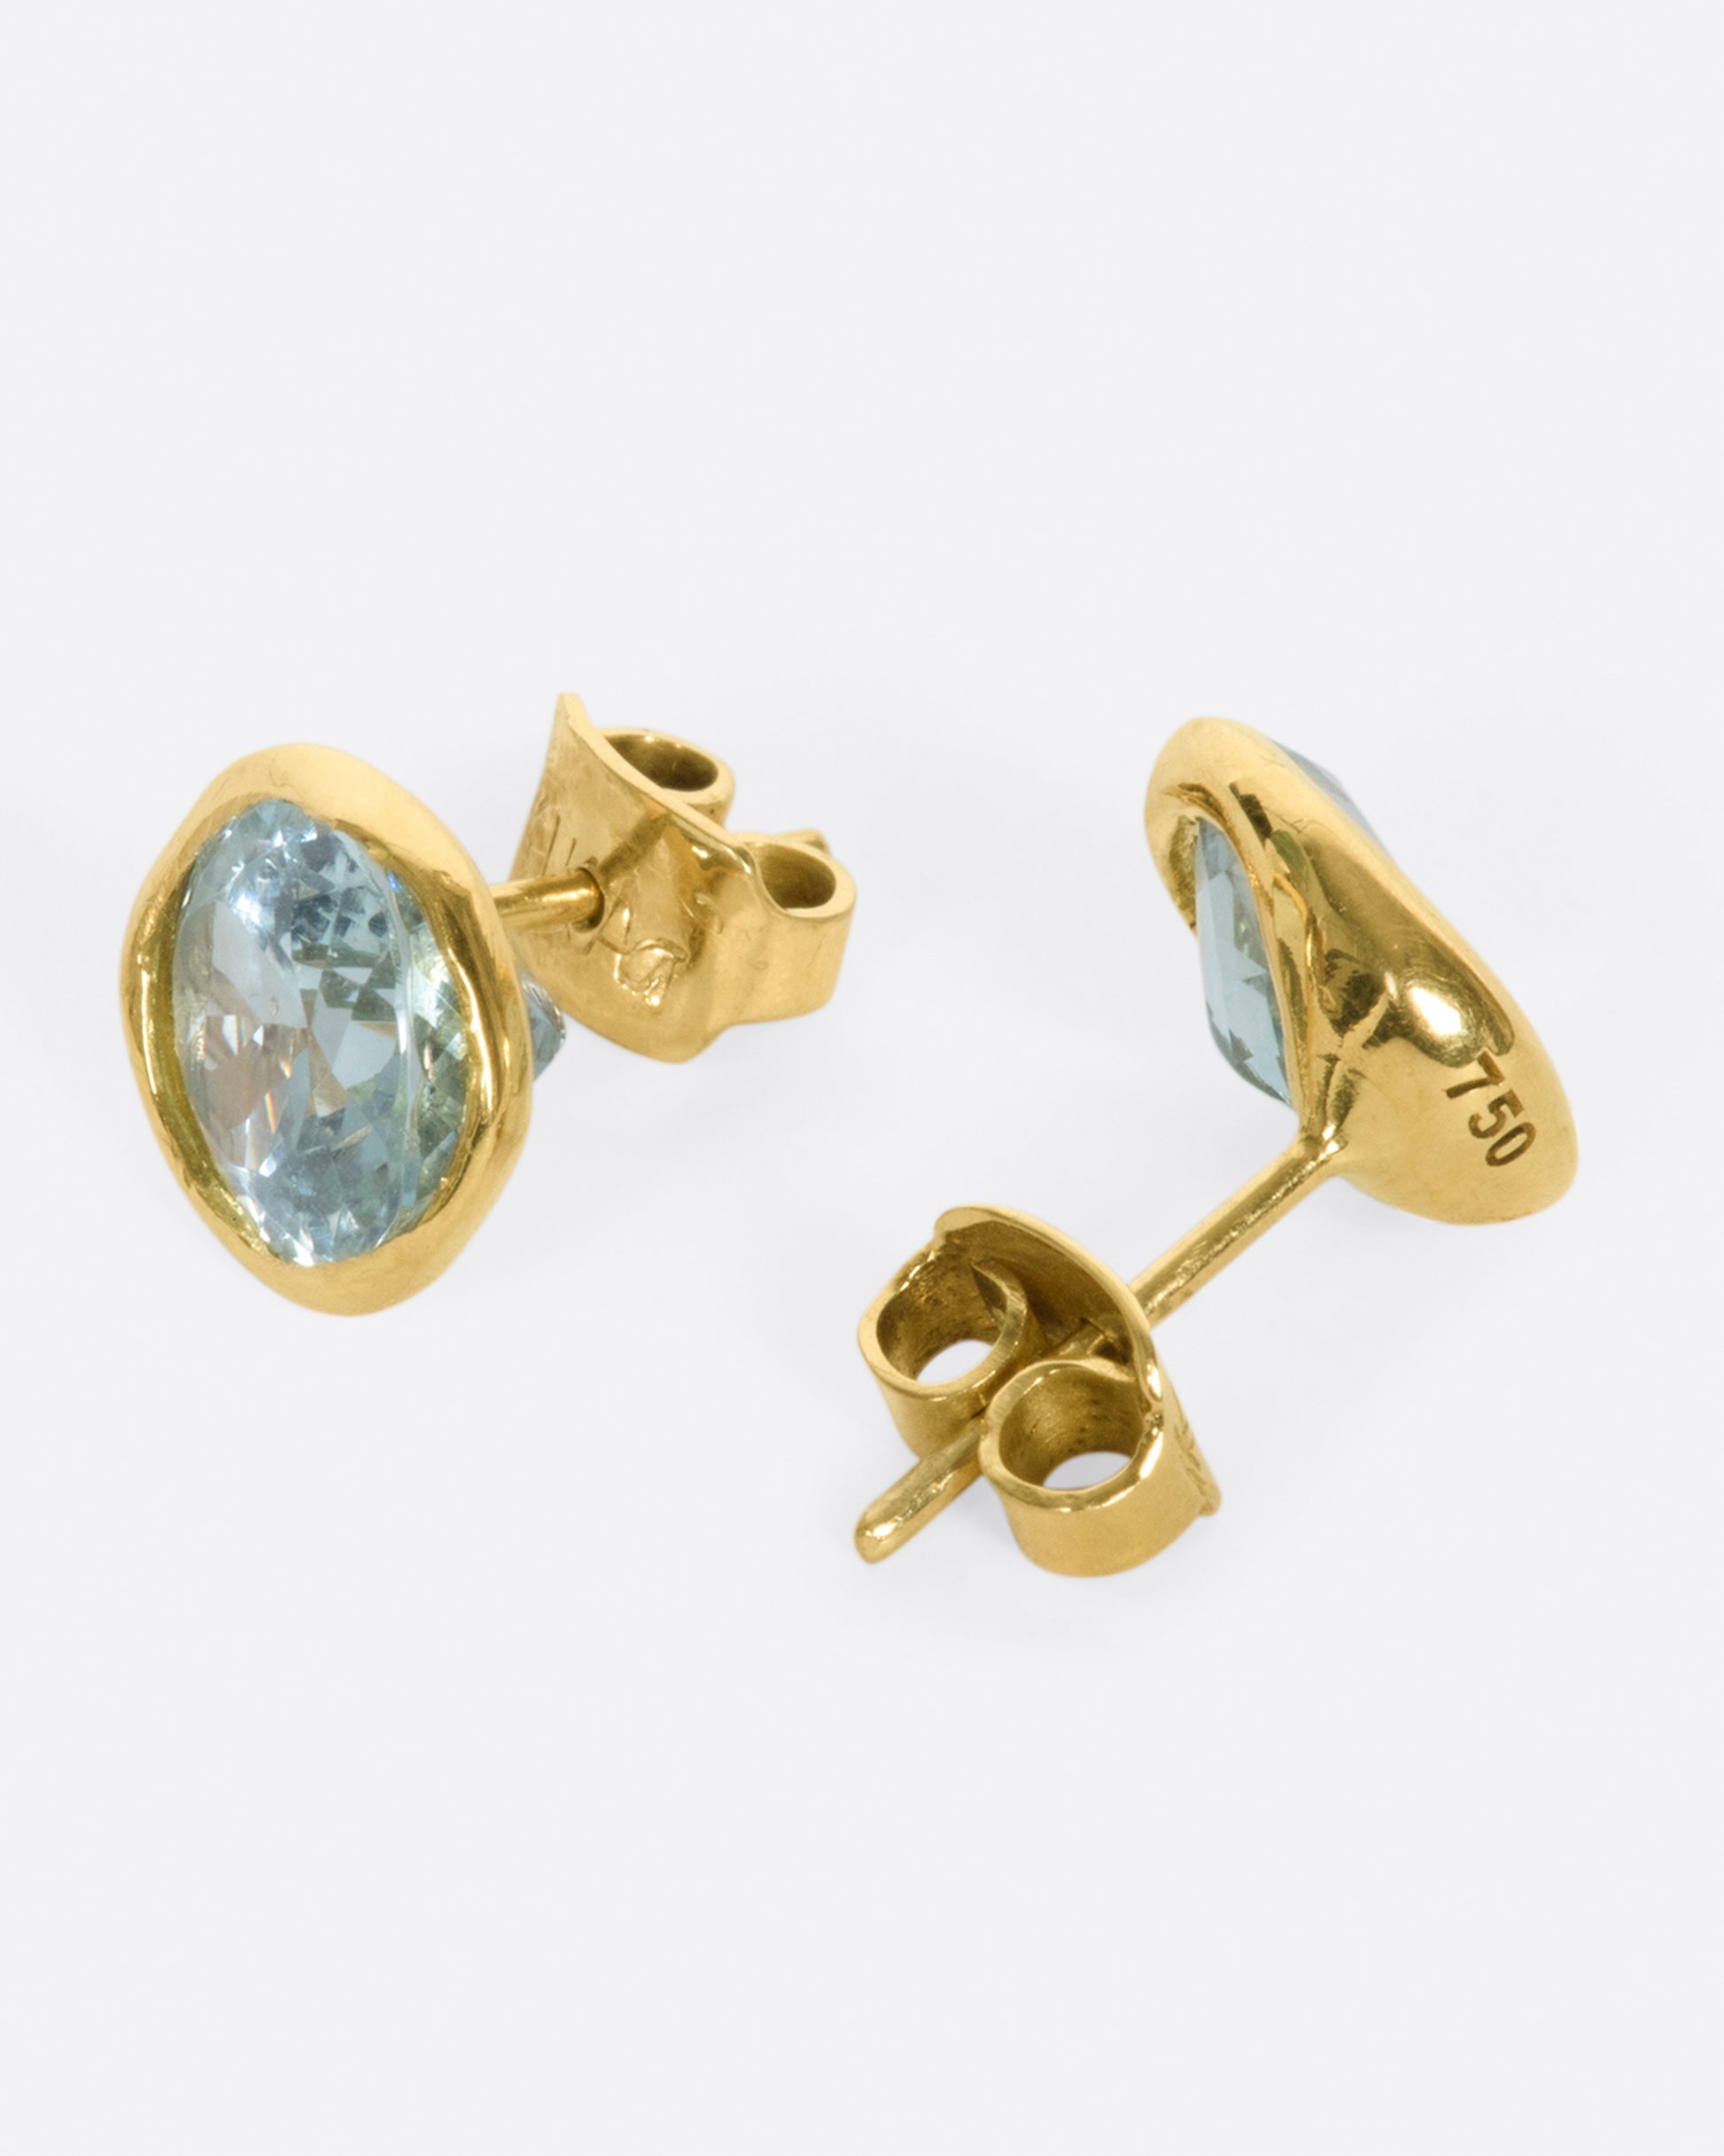 A pair of yellow gold and aquamarine solitaire stud earrings, shown from the side.